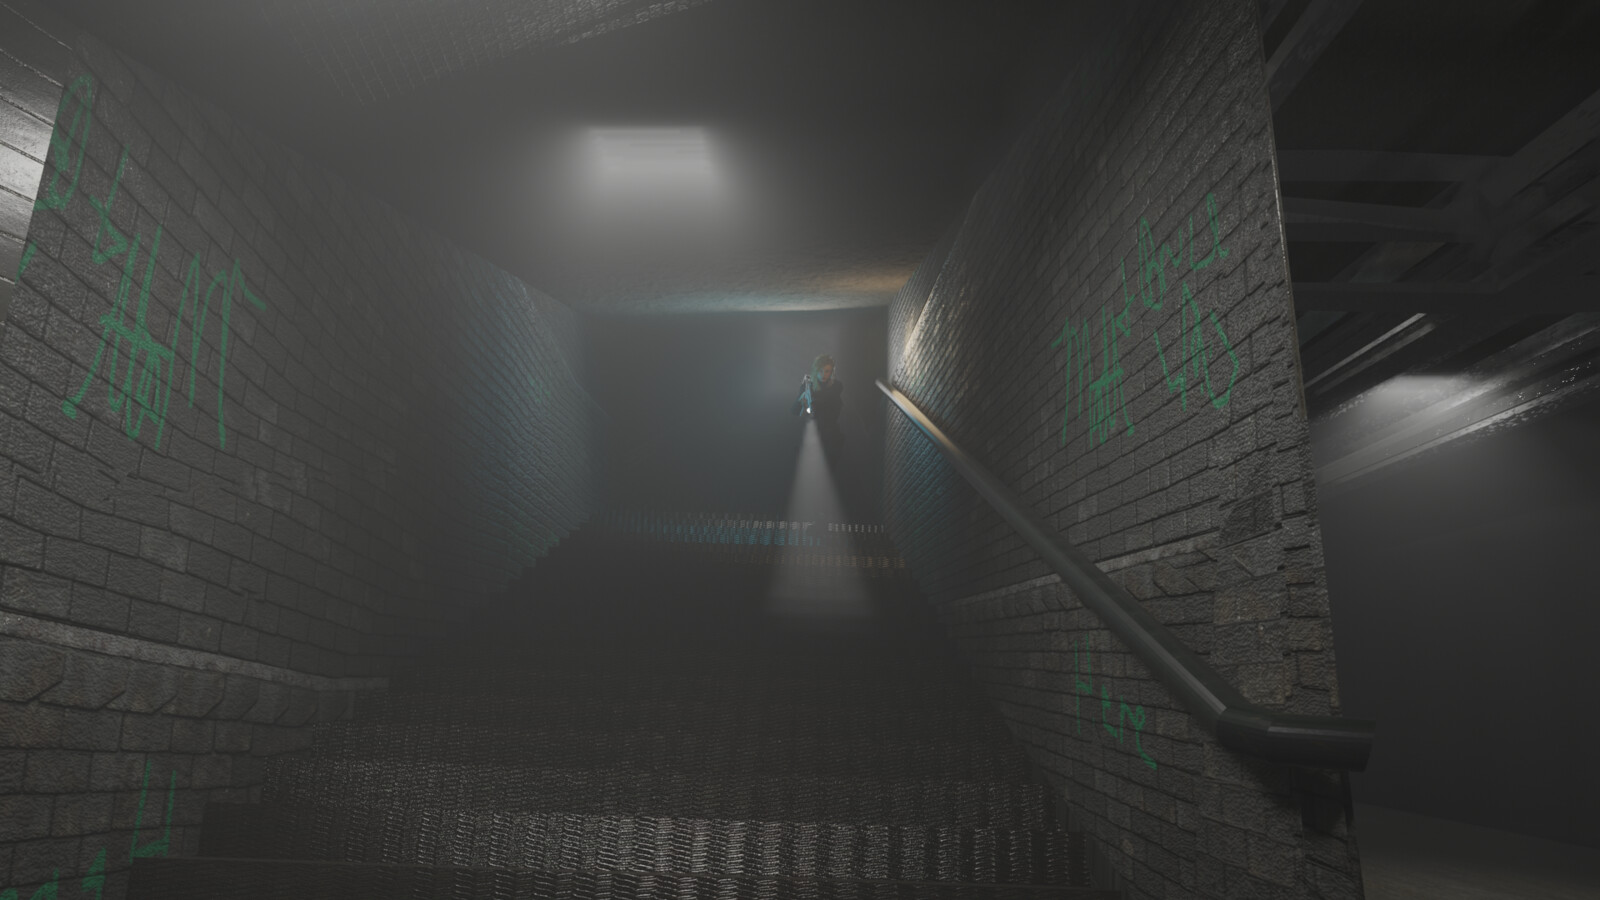 Going in an abandoned Tunnel system can never end well